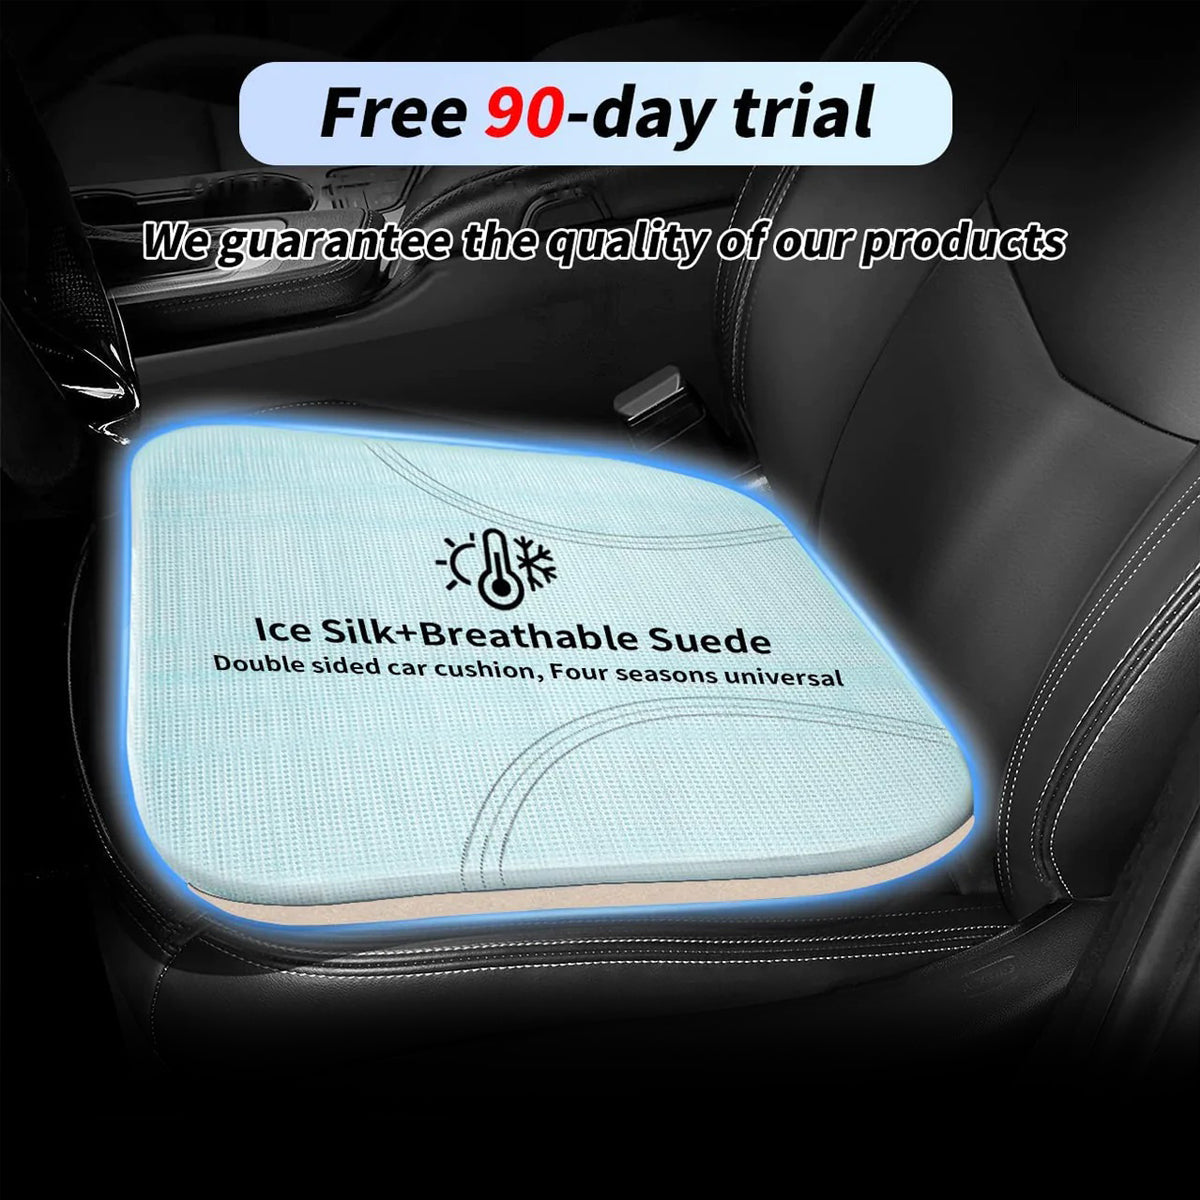 Car Seat Cushion, Custom For Cars, Car Memory Foam Seat Cushion, Heightening Seat Cushion, Seat Cushion for Car and Office Chair UE19999 - Delicate Leather